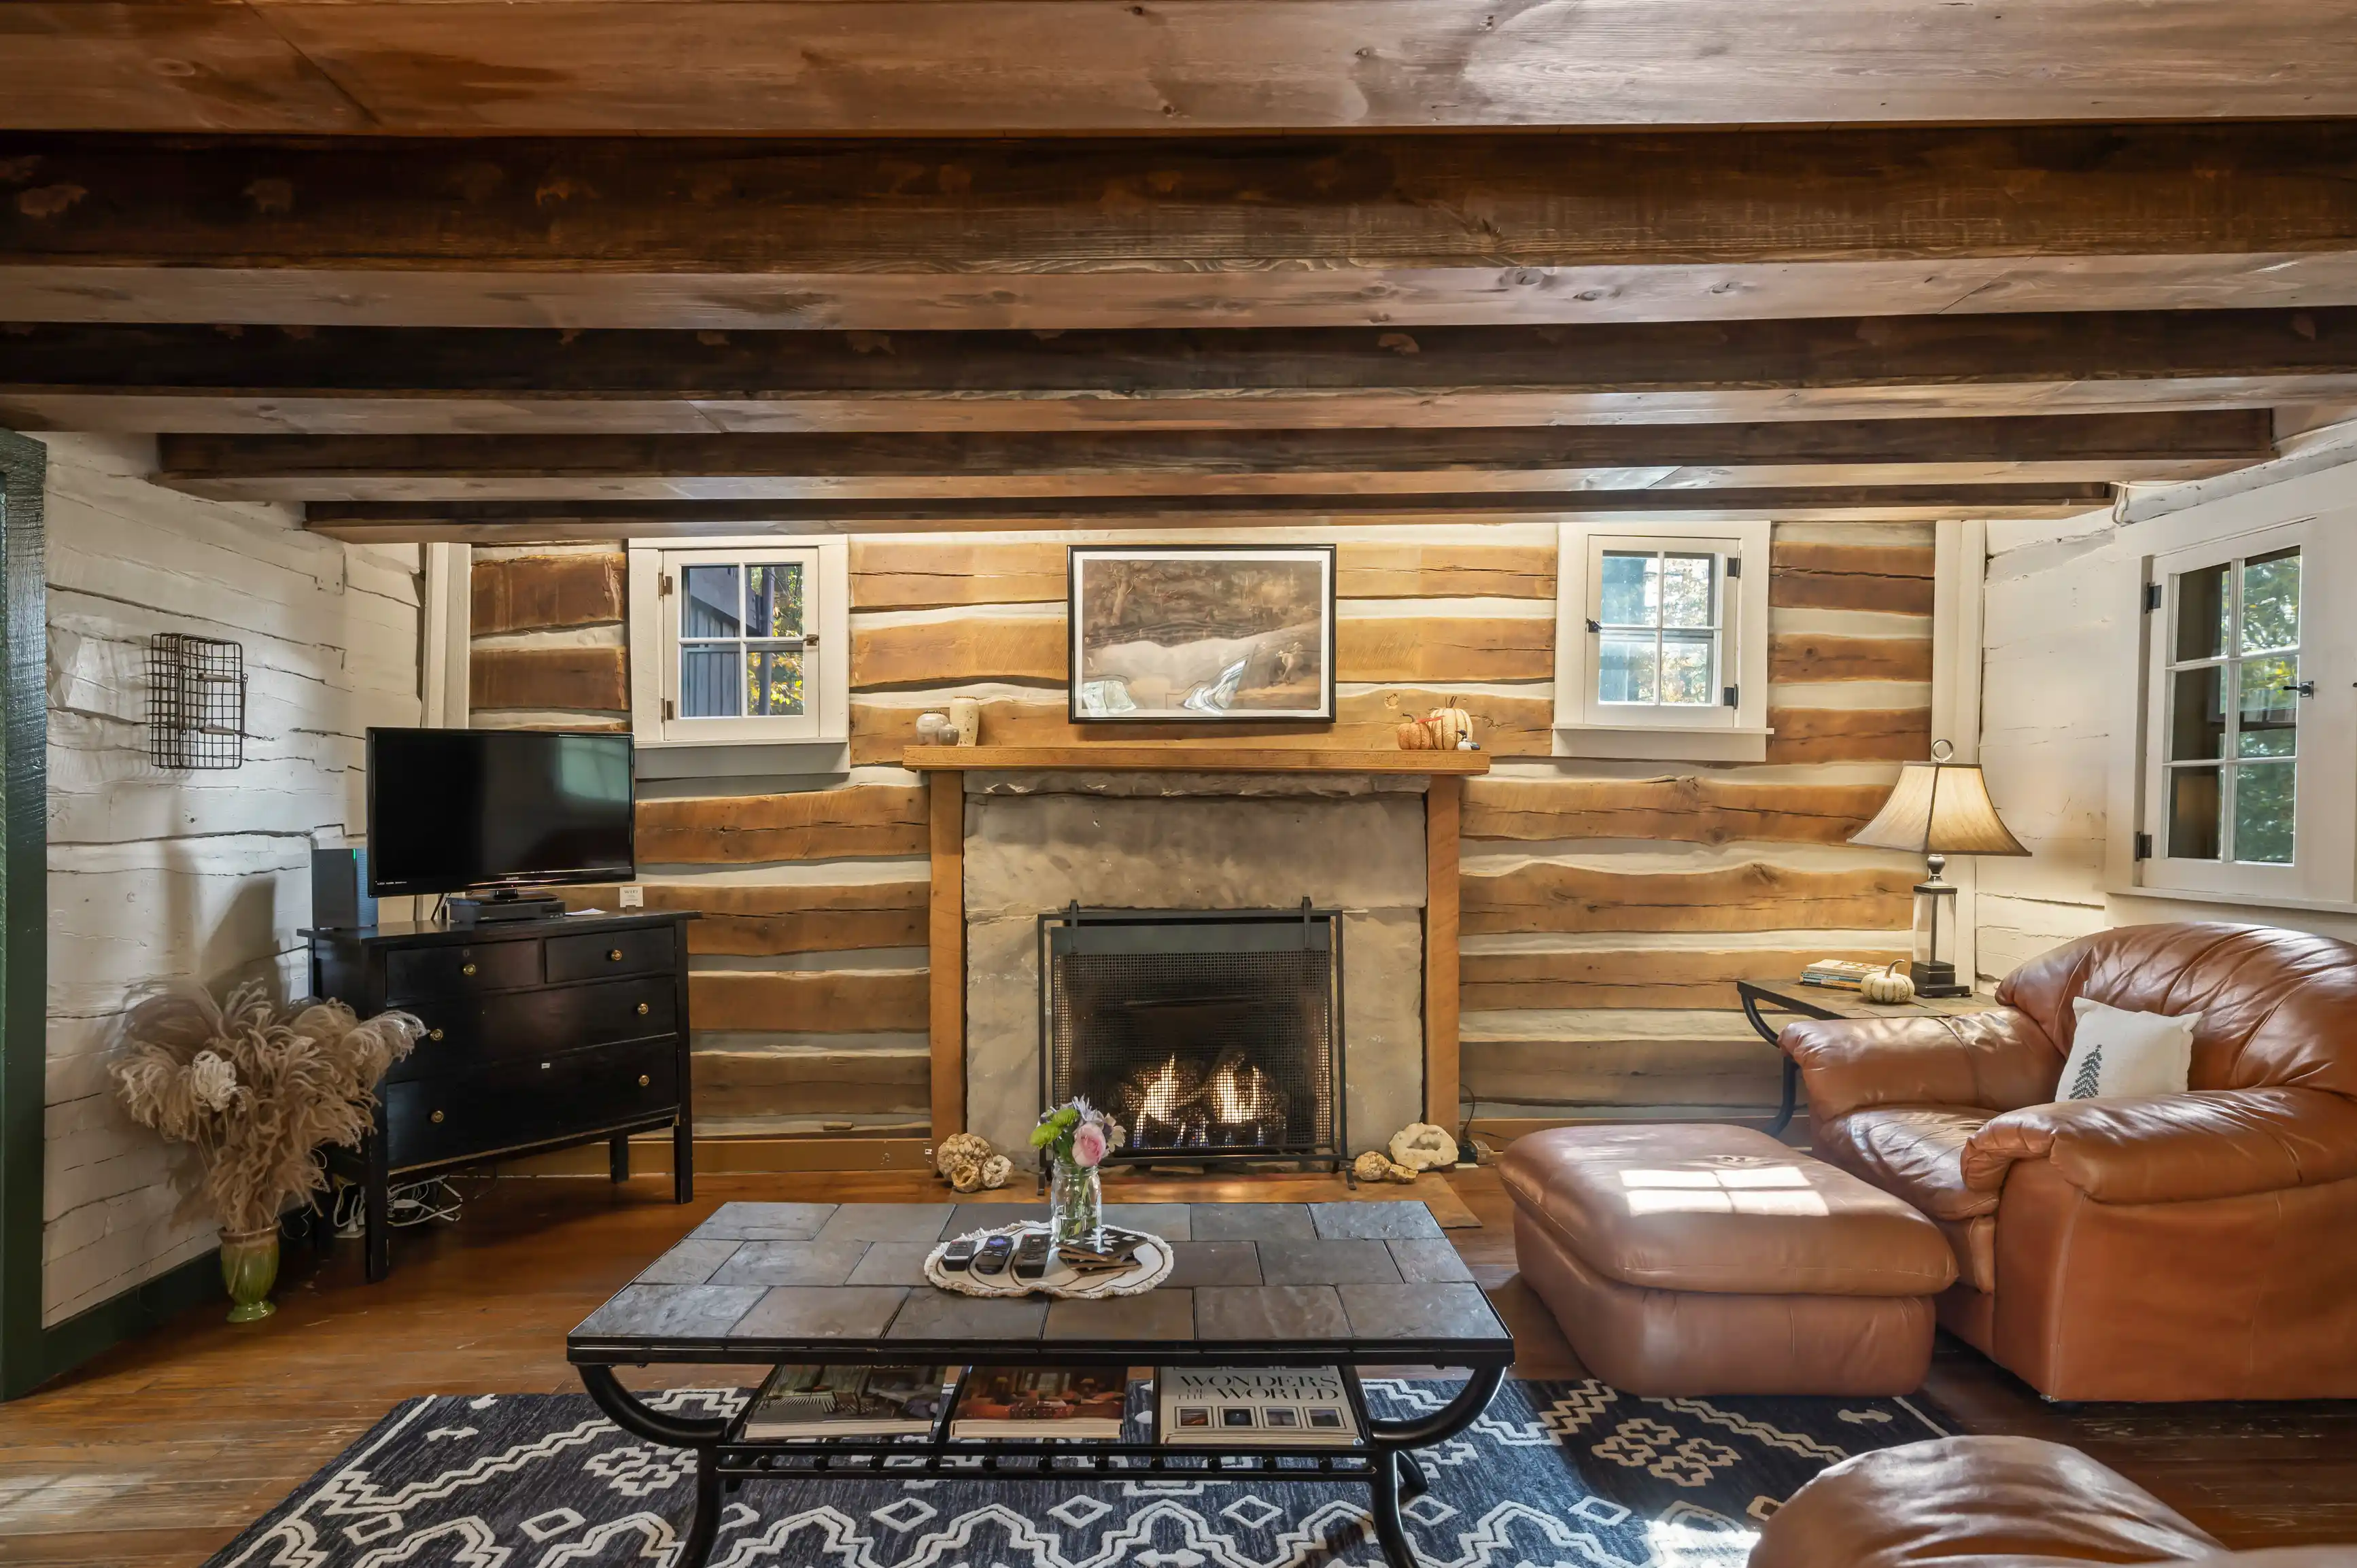 Cozy cabin living room interior with a lit fireplace, leather sofas, wooden walls, a Persian rug, and a flat-screen TV.